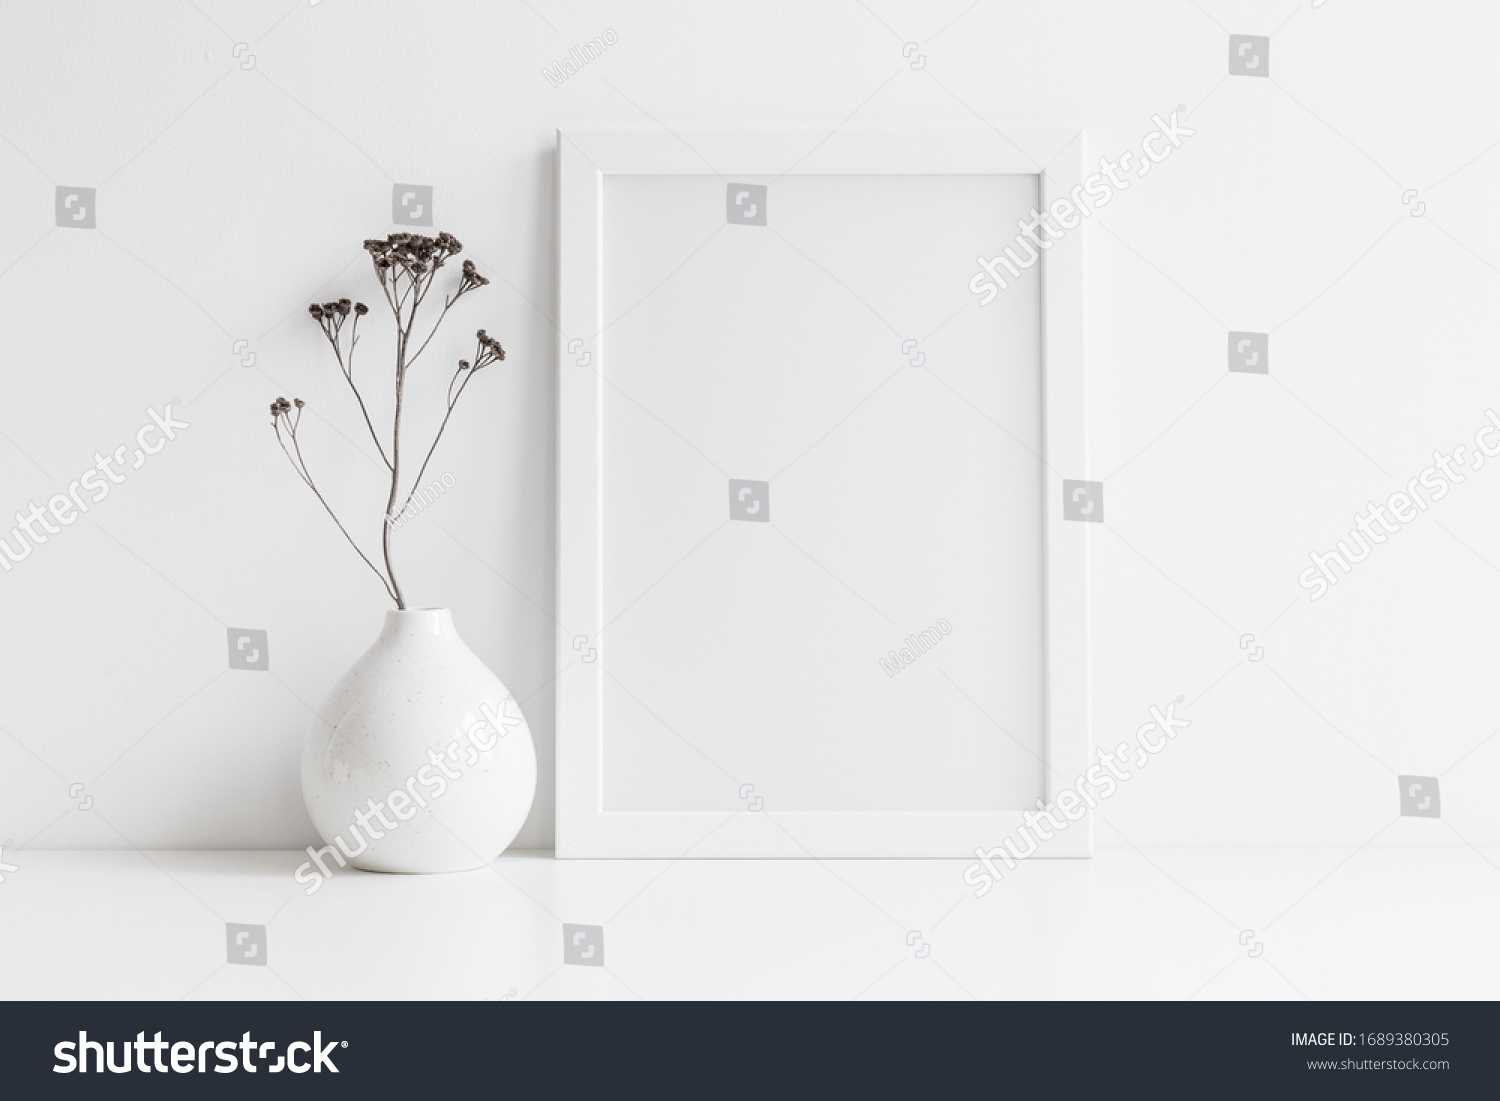 White desk with photo frame and  minimal round vase with a decorative twig against white wall.  #1689380305